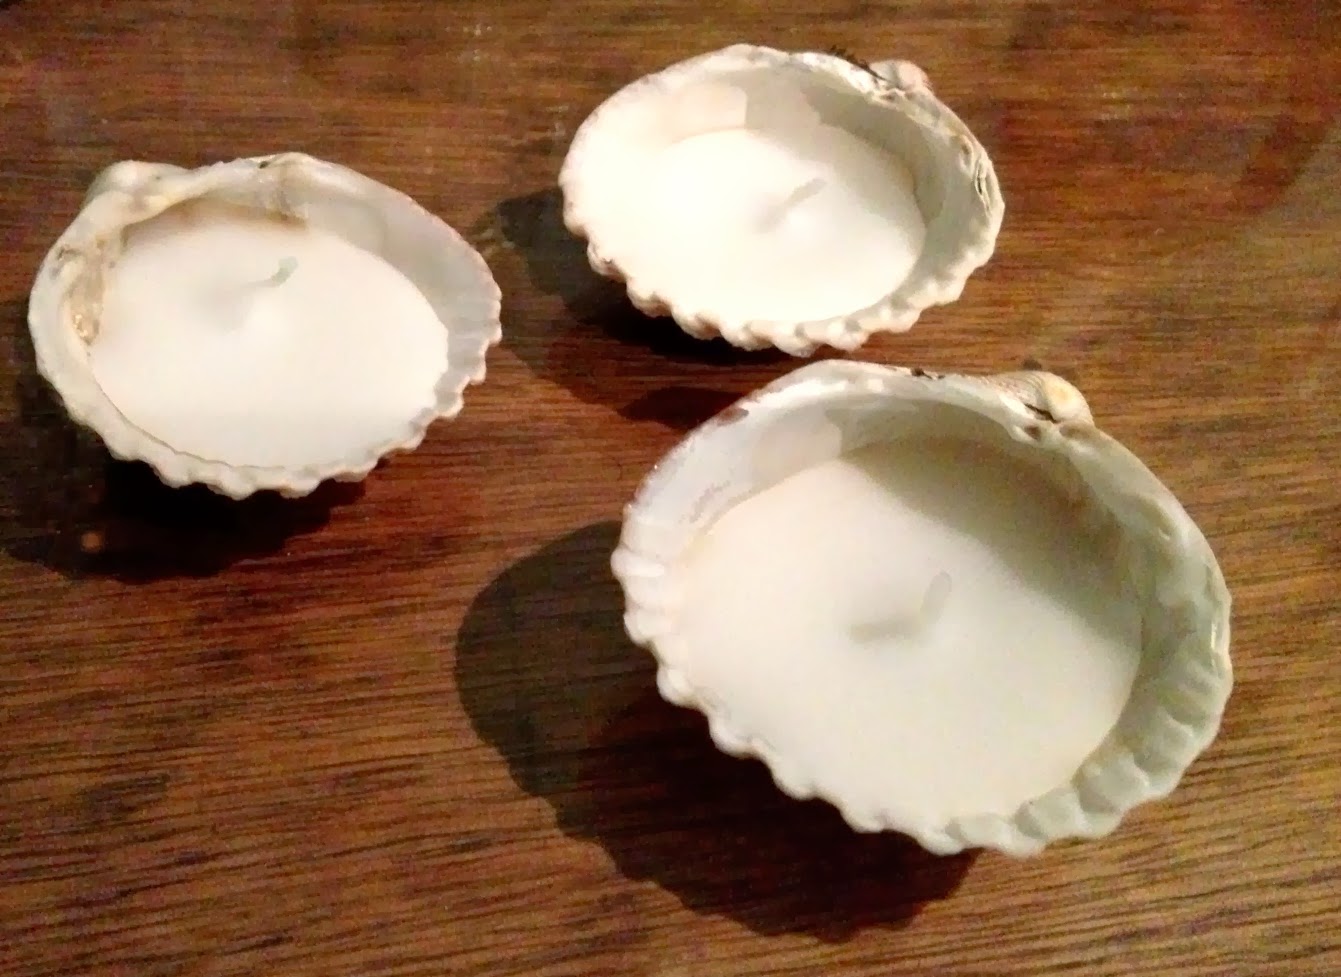 How to make candles in sea shells